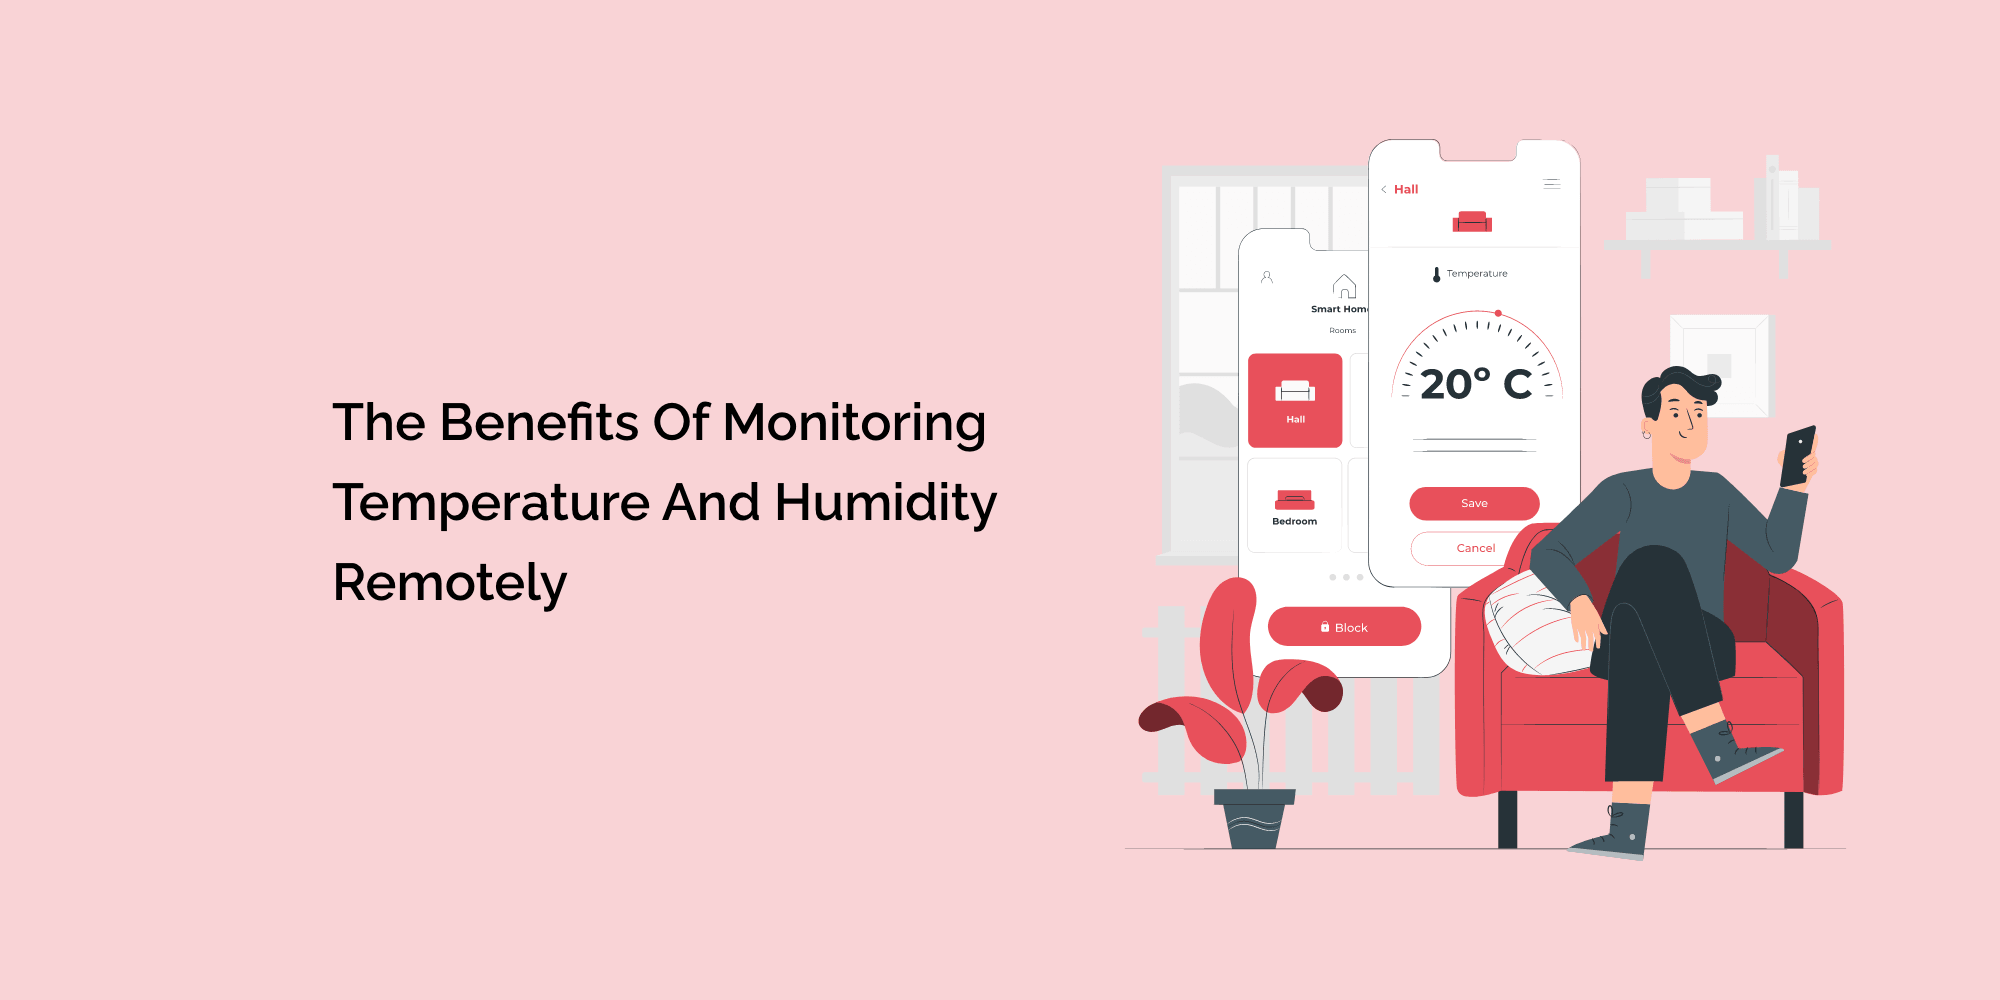 The Benefits of Monitoring Temperature and Humidity Remotely